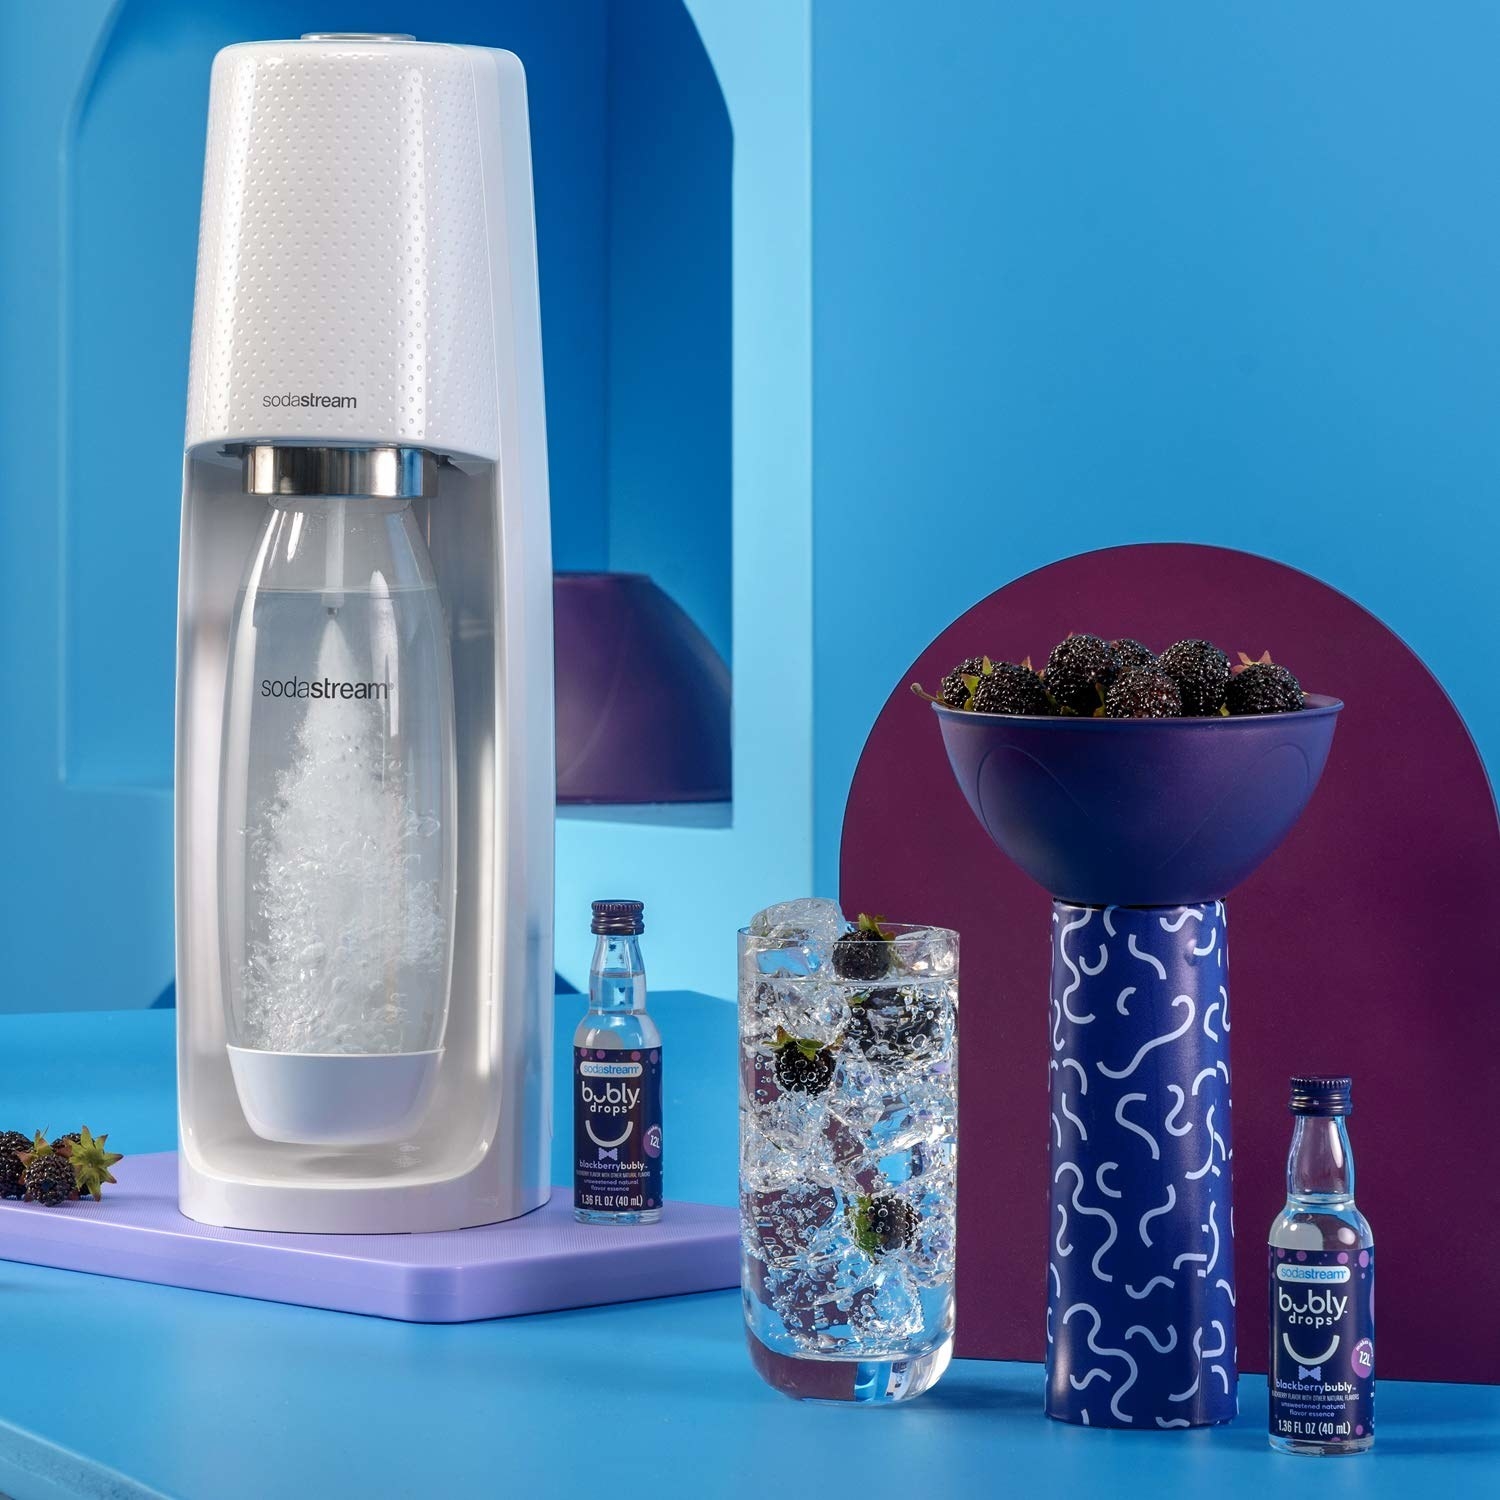 The SodaStream machine in a kitchen next to bottles of the Bubly drops